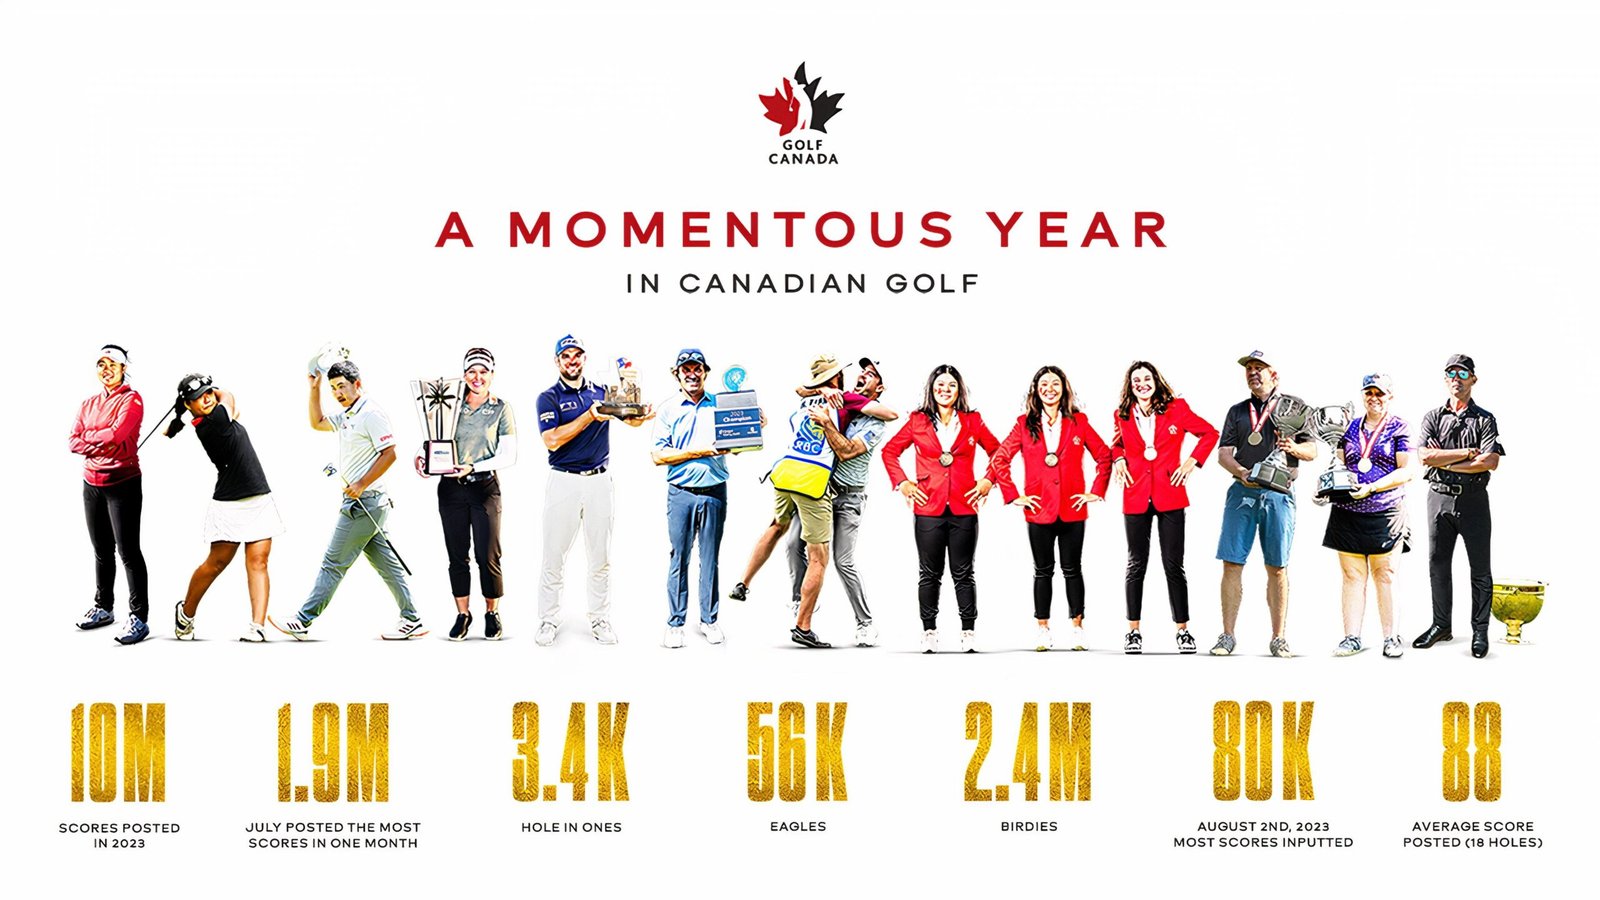 2023 – A momentous year in Canadian Golf